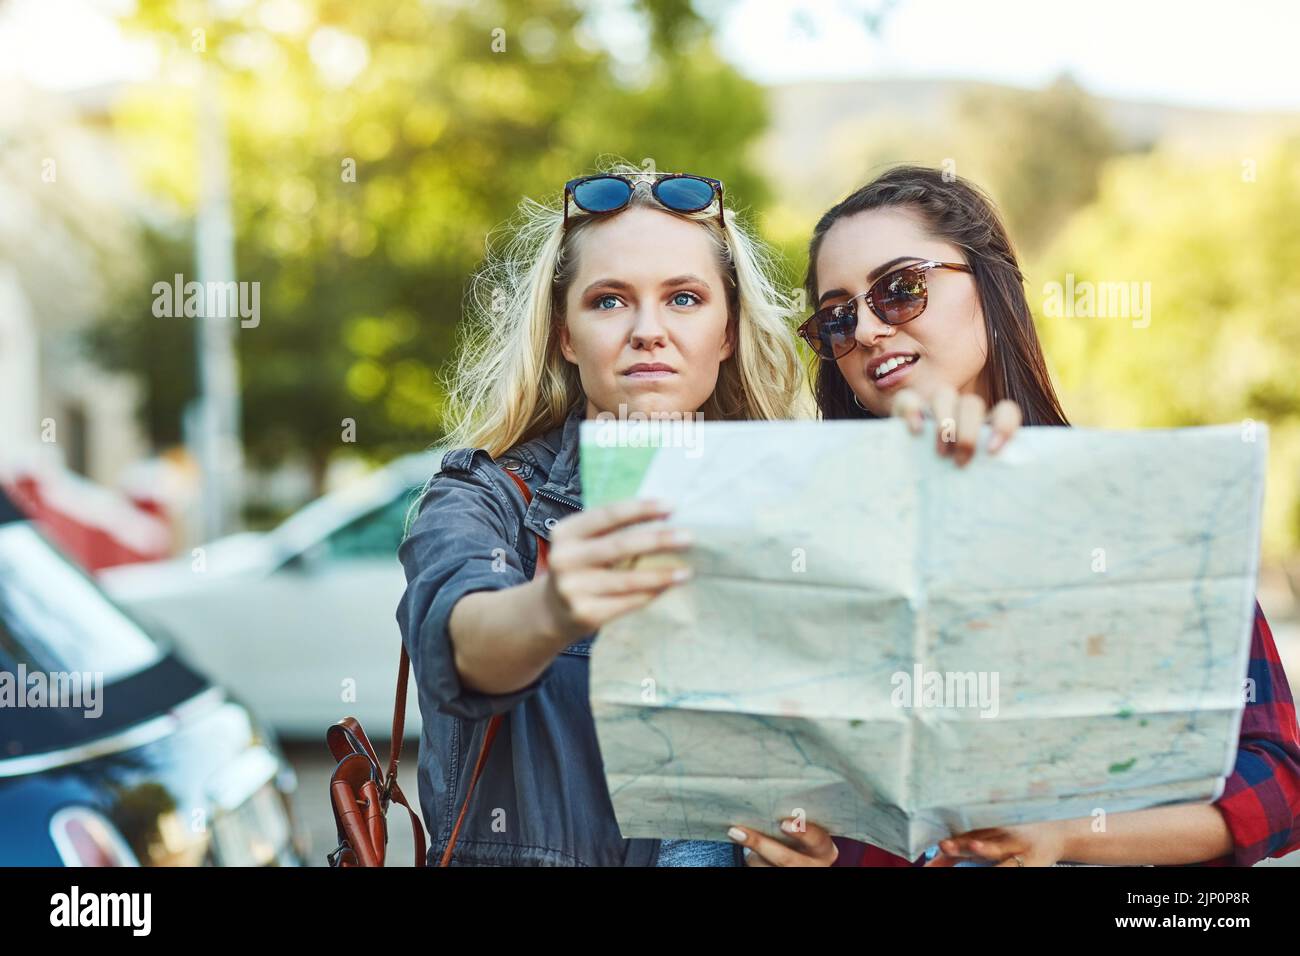 Getting lost is part of the journey. two beautiful female friends looking at a map for directions in the city. Stock Photo